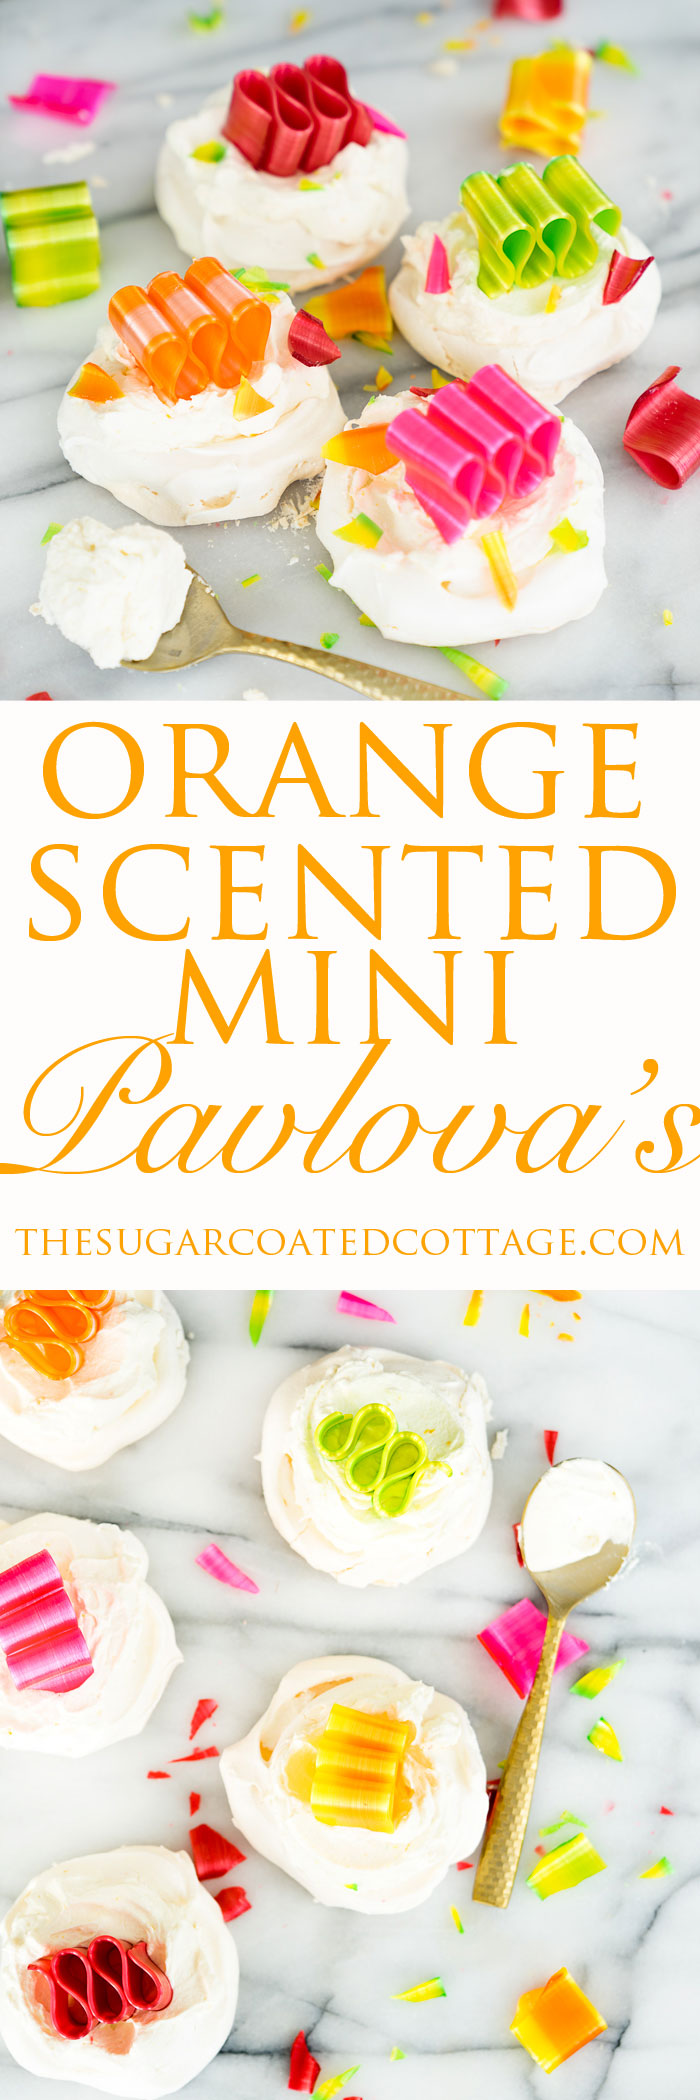 Orange Scented Mini Pavlovas recipe. Crispy, chewy meringues with a dollop of orange scented whipped cream! | thesugarcoatedcottage.com